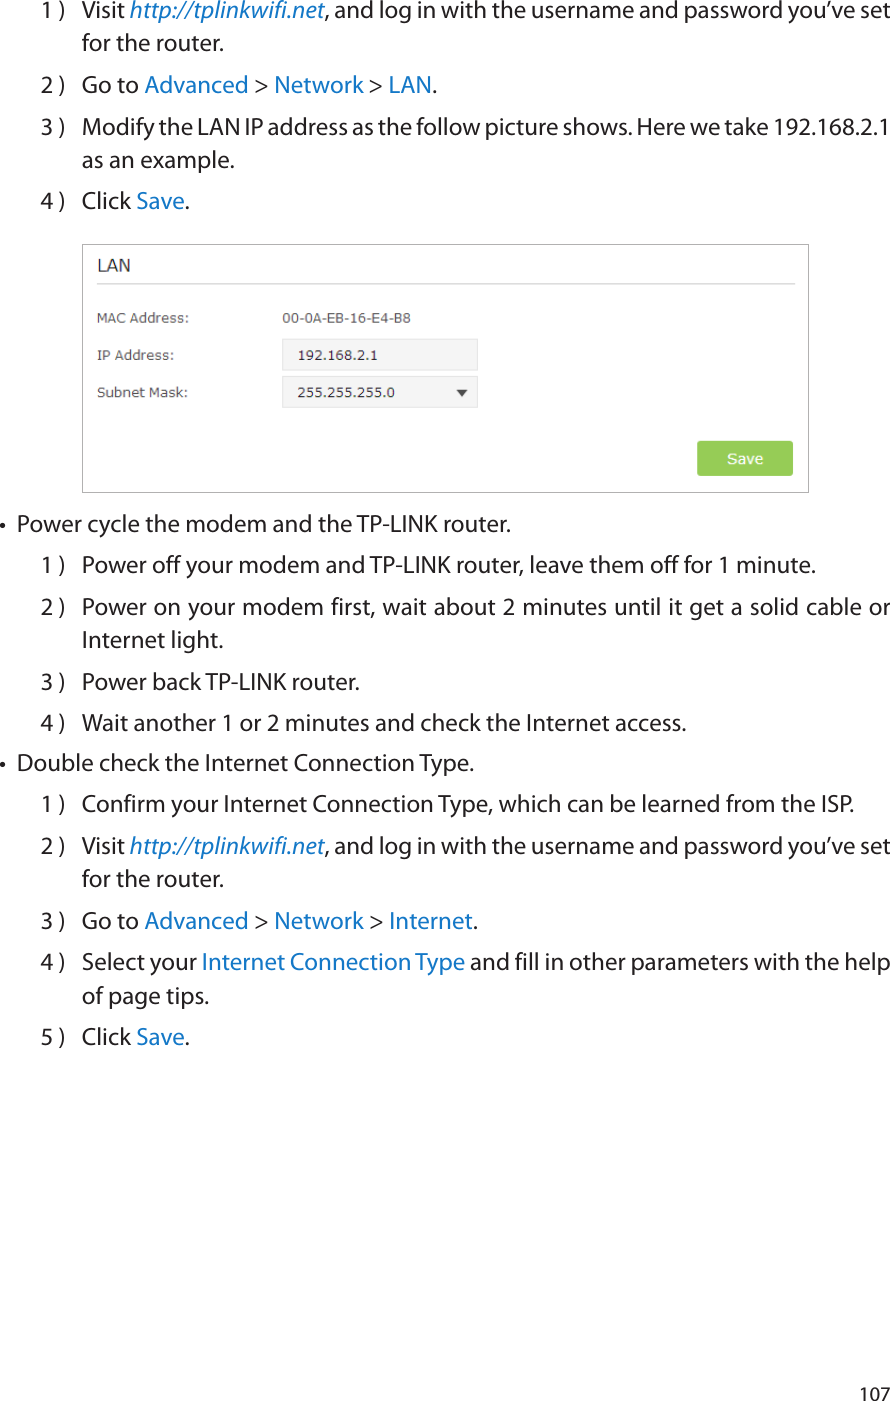 1071 )  Visit http://tplinkwifi.net, and log in with the username and password you’ve set for the router.2 )  Go to Advanced &gt; Network &gt; LAN.3 )  Modify the LAN IP address as the follow picture shows. Here we take 192.168.2.1 as an example.4 )  Click Save.•  Power cycle the modem and the TP-LINK router.1 )  Power off your modem and TP-LINK router, leave them off for 1 minute.2 )  Power on your modem first, wait about 2 minutes until it get a solid cable or Internet light.3 )  Power back TP-LINK router.4 )  Wait another 1 or 2 minutes and check the Internet access.•  Double check the Internet Connection Type.1 )  Confirm your Internet Connection Type, which can be learned from the ISP.2 )  Visit http://tplinkwifi.net, and log in with the username and password you’ve set for the router.3 )  Go to Advanced &gt; Network &gt; Internet.4 )  Select your Internet Connection Type and fill in other parameters with the help of page tips.5 )  Click Save.